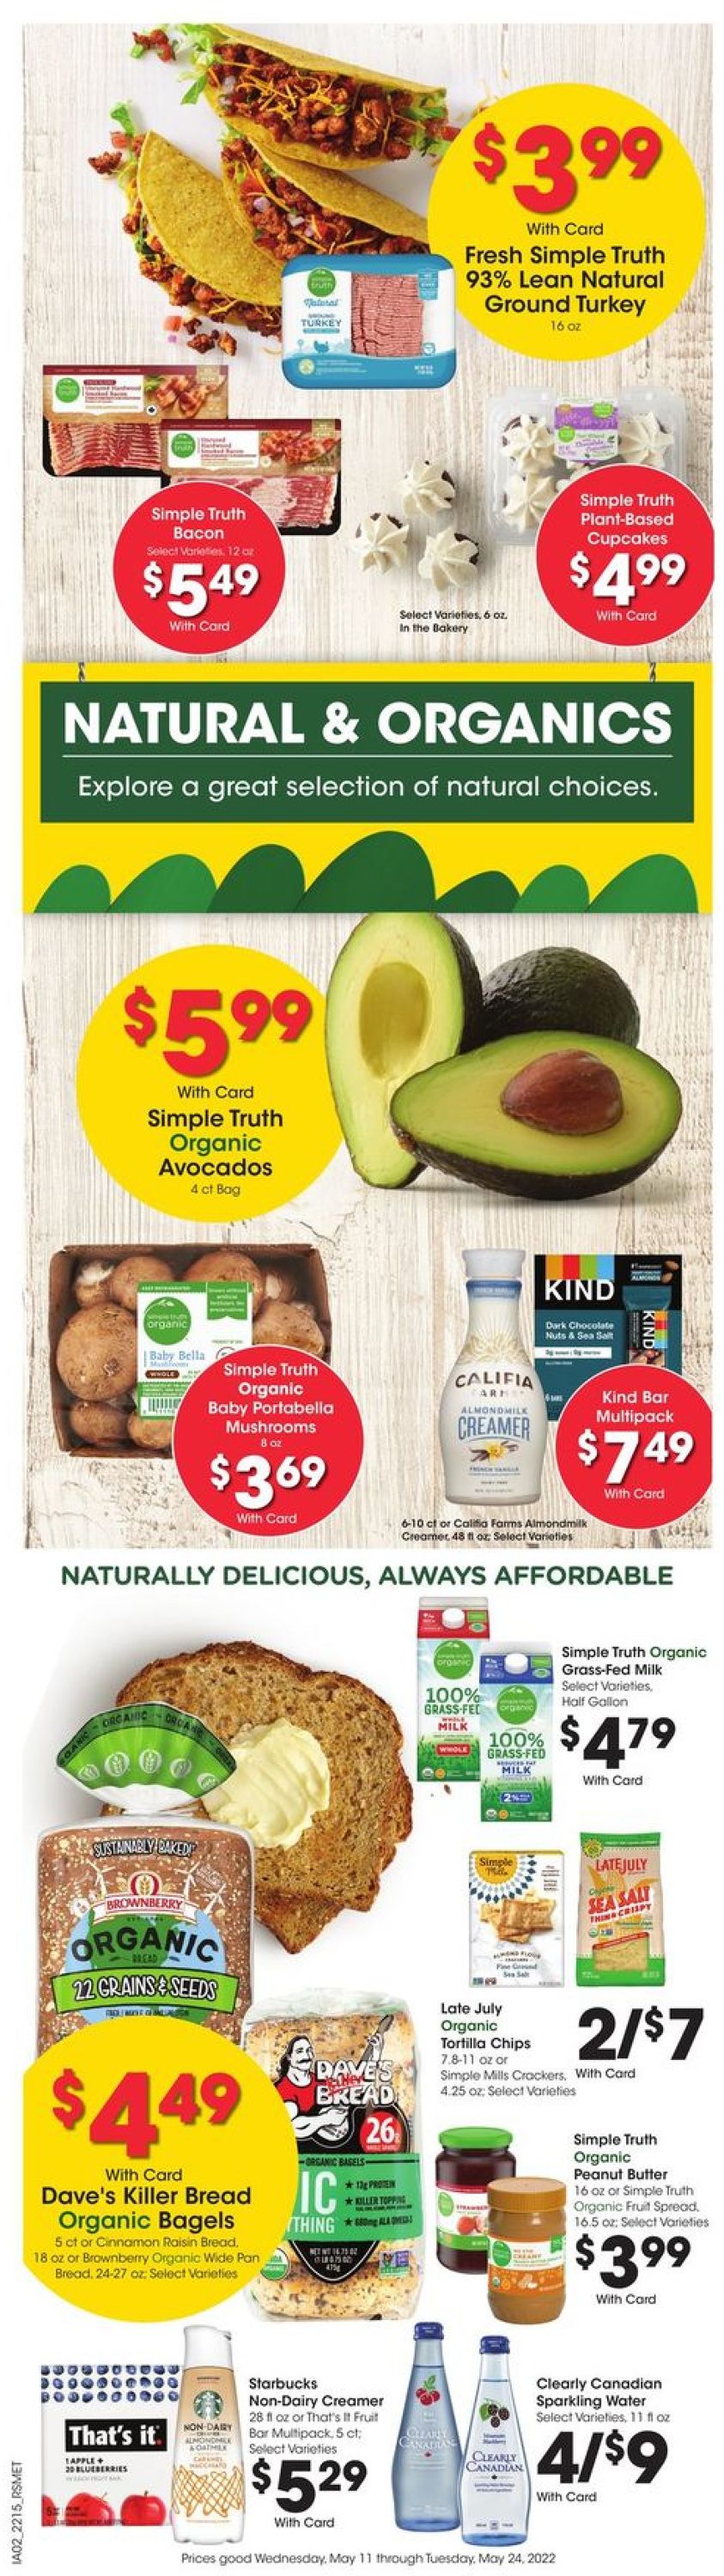 Pick ‘n Save Ad from 05/18/2022